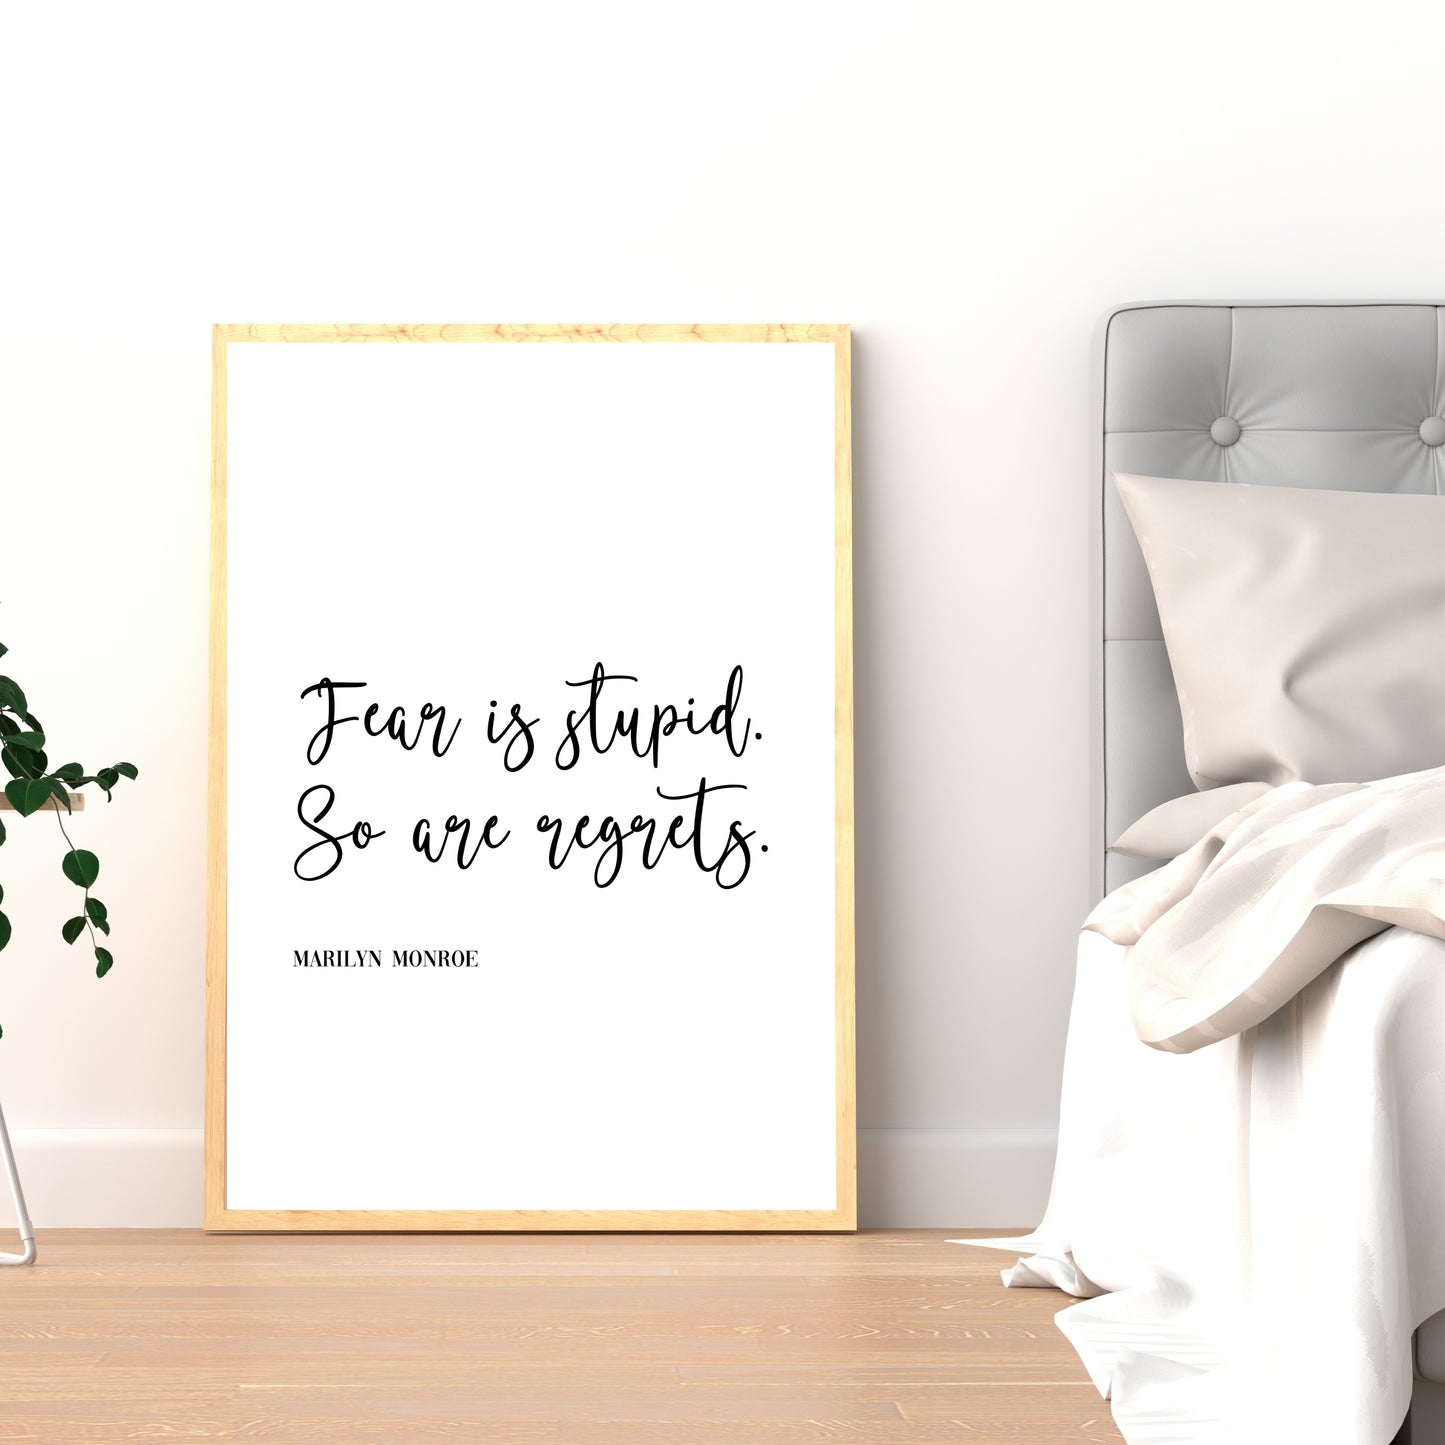 "Fear Is Stupid.  So Are Regrets." Famous Quote by Marilyn Monroe, Printable Art